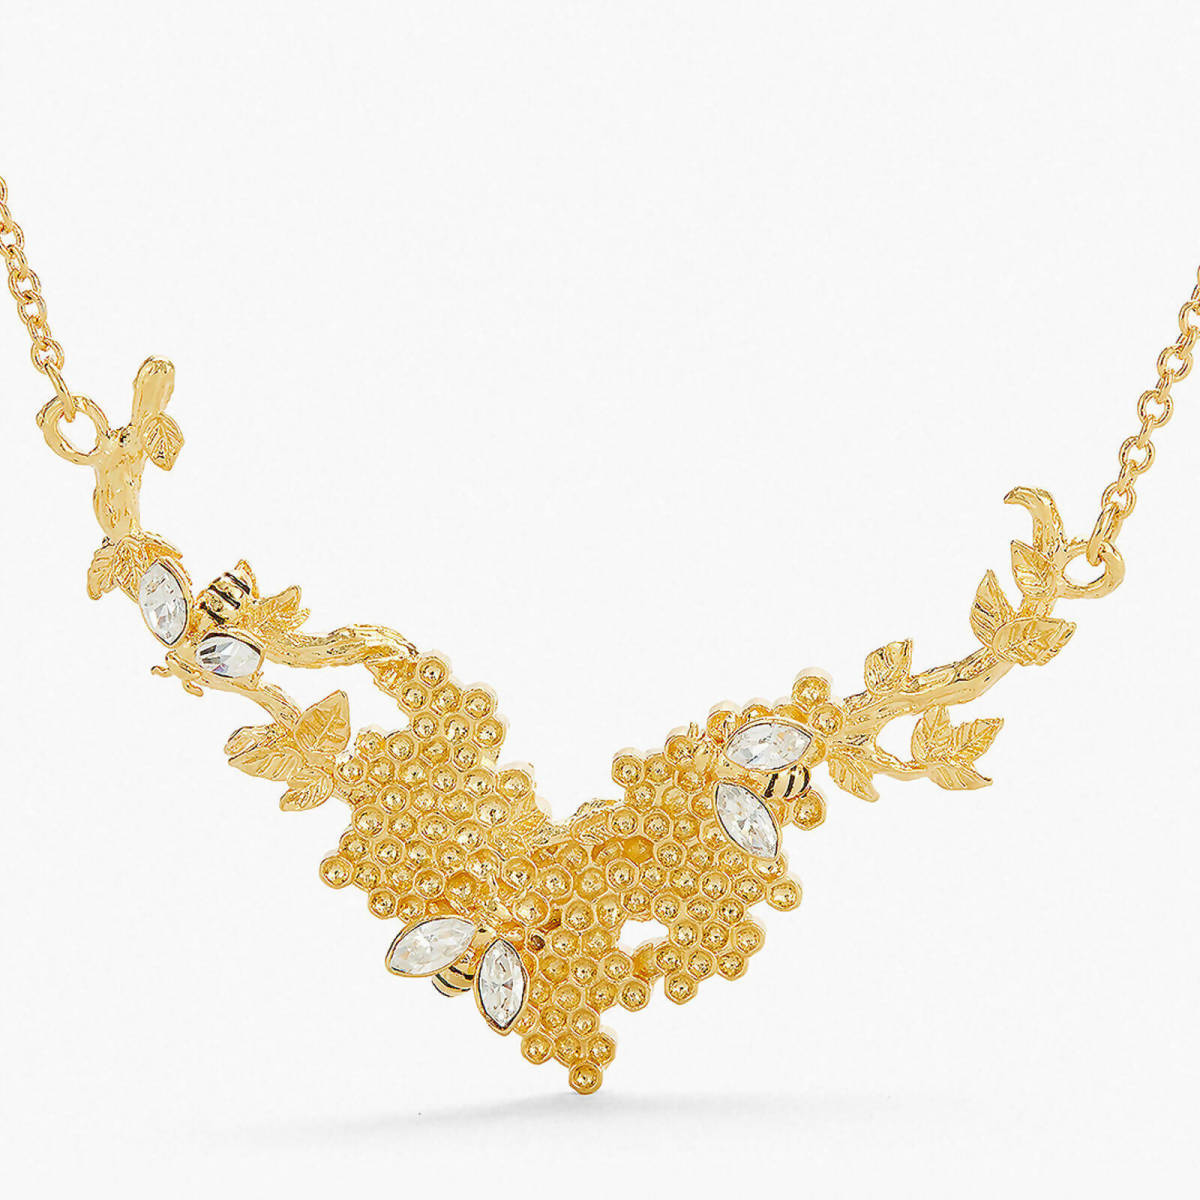 COLLAR NECKLACES HONEYCOMBS AND BEES COLLAR NECKLACE - Yooto